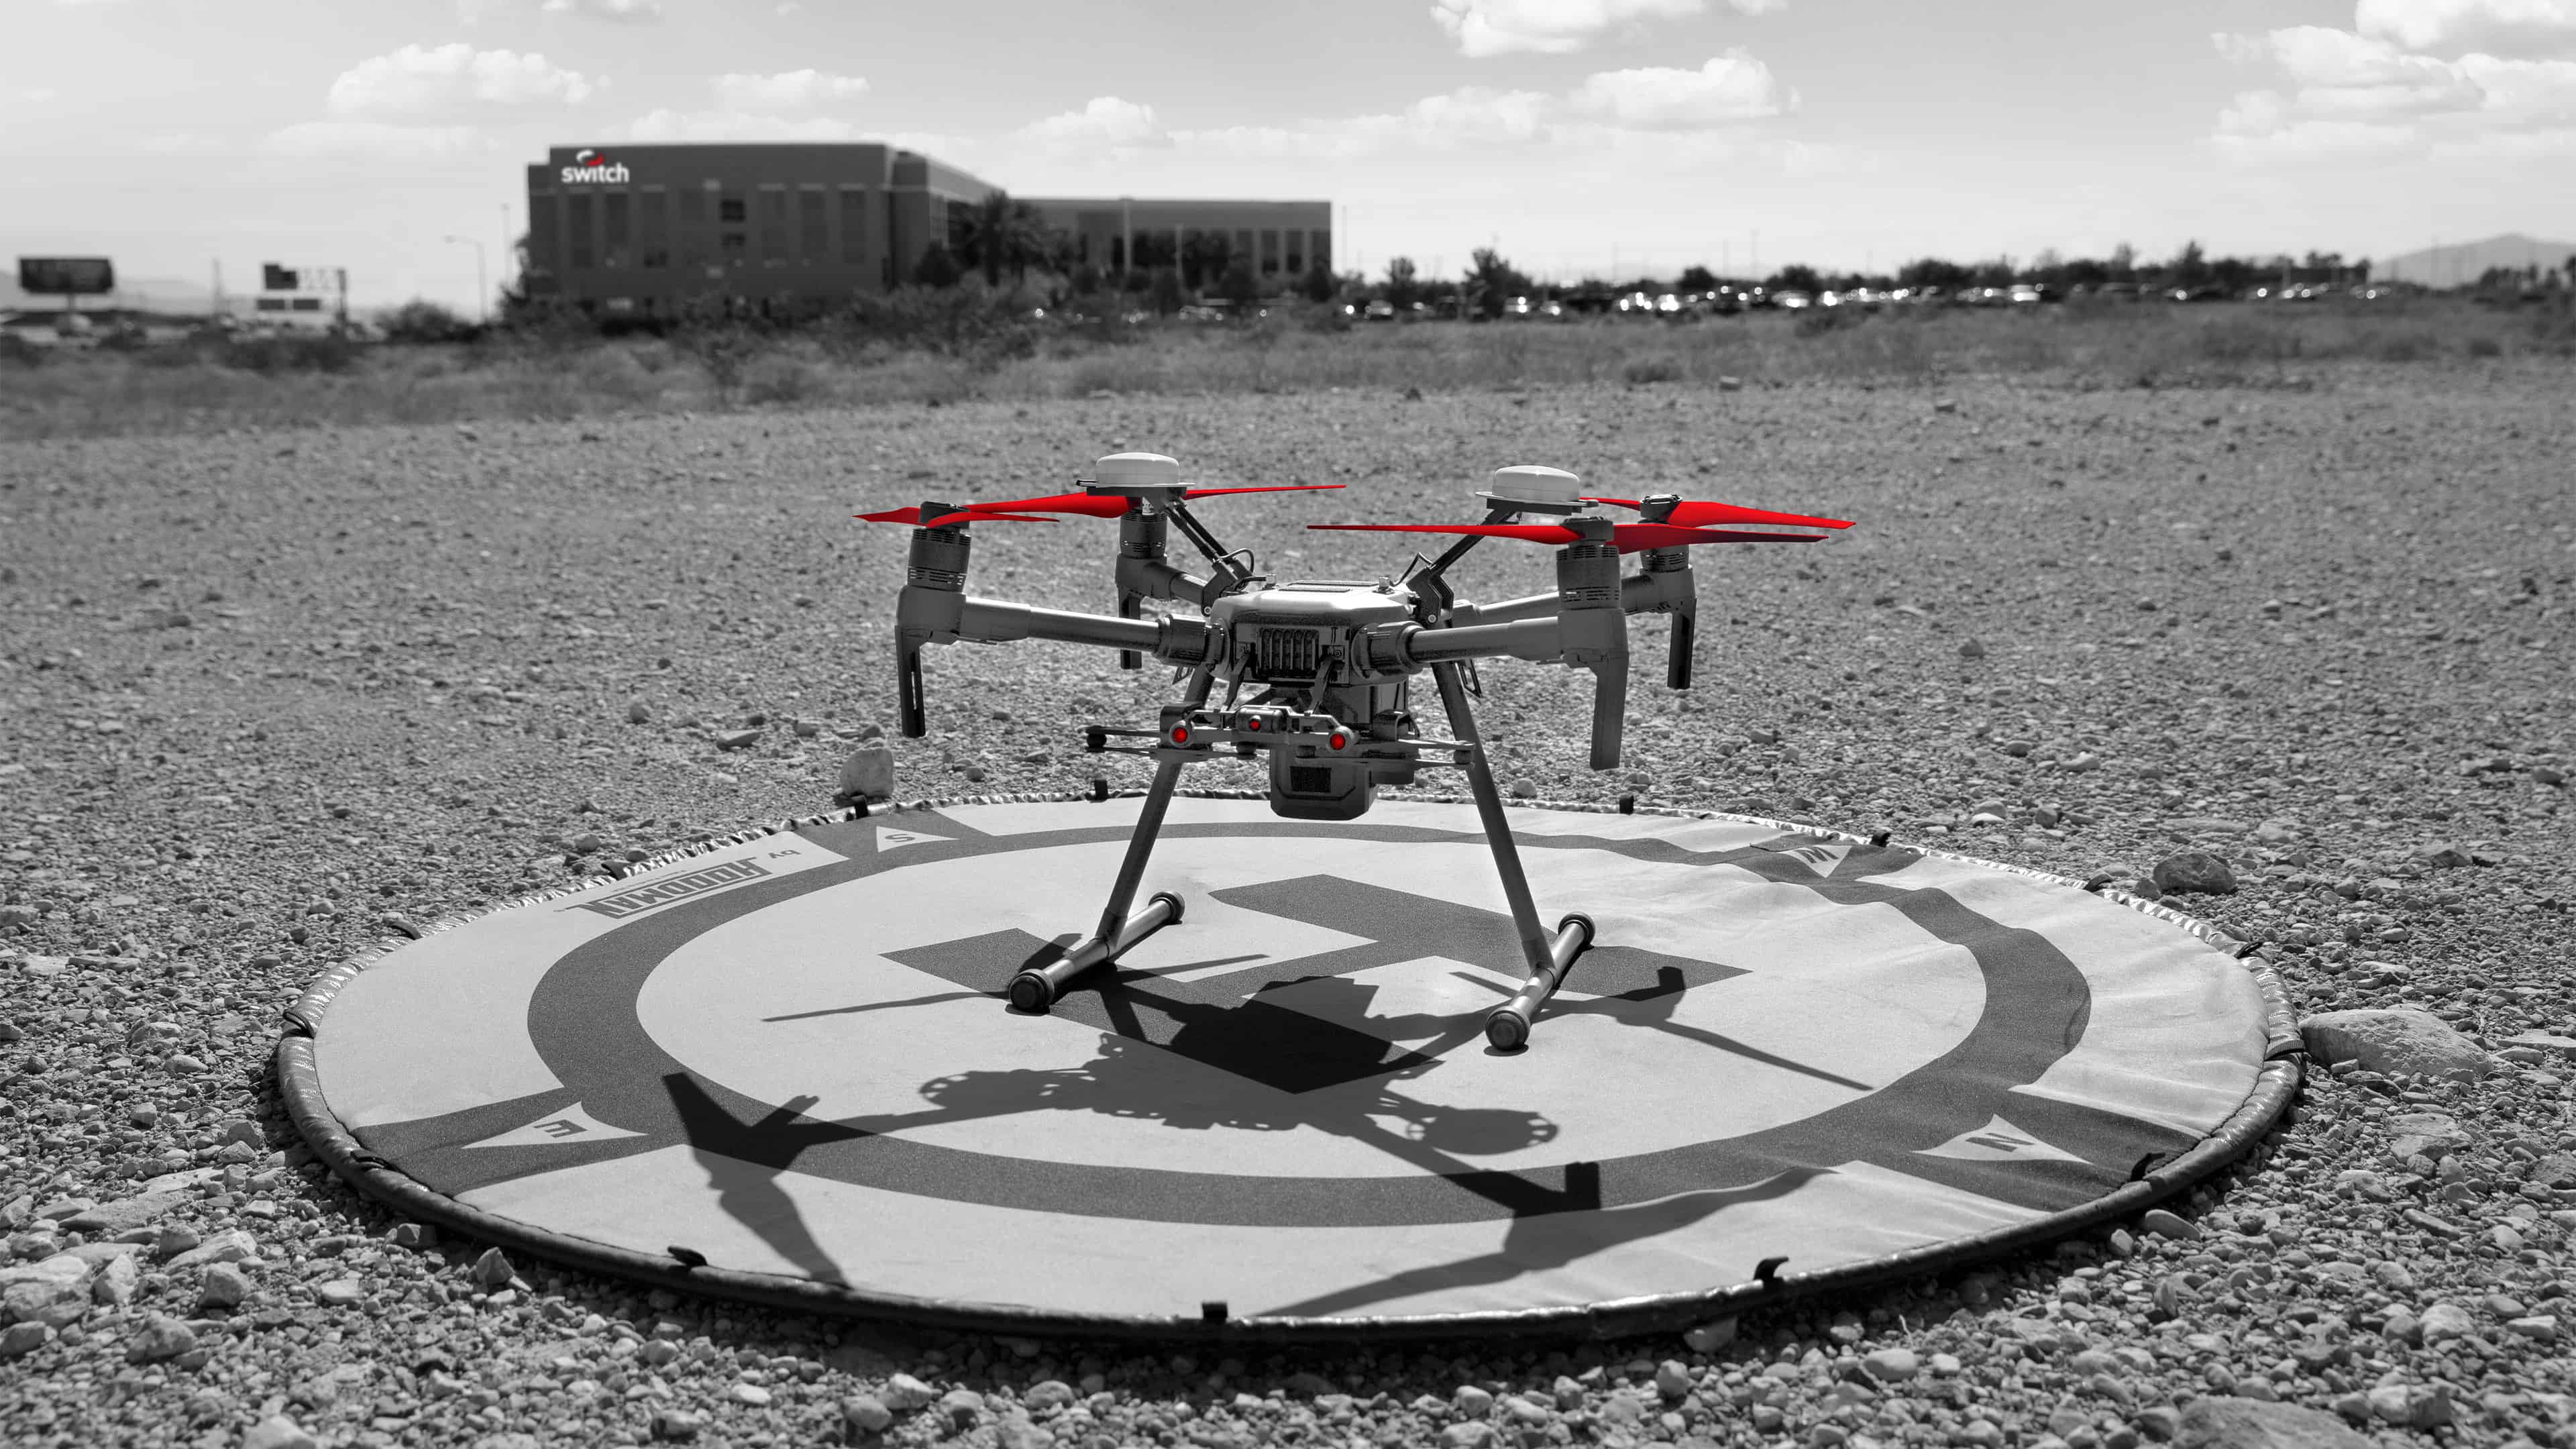 The State of Nevada, City of Reno, Las Vegas, Henderson, Searchlight, NIAS, and Nevada Partners Complete Historic FAA Unmanned Traffic Management (UTM) Pilot Program